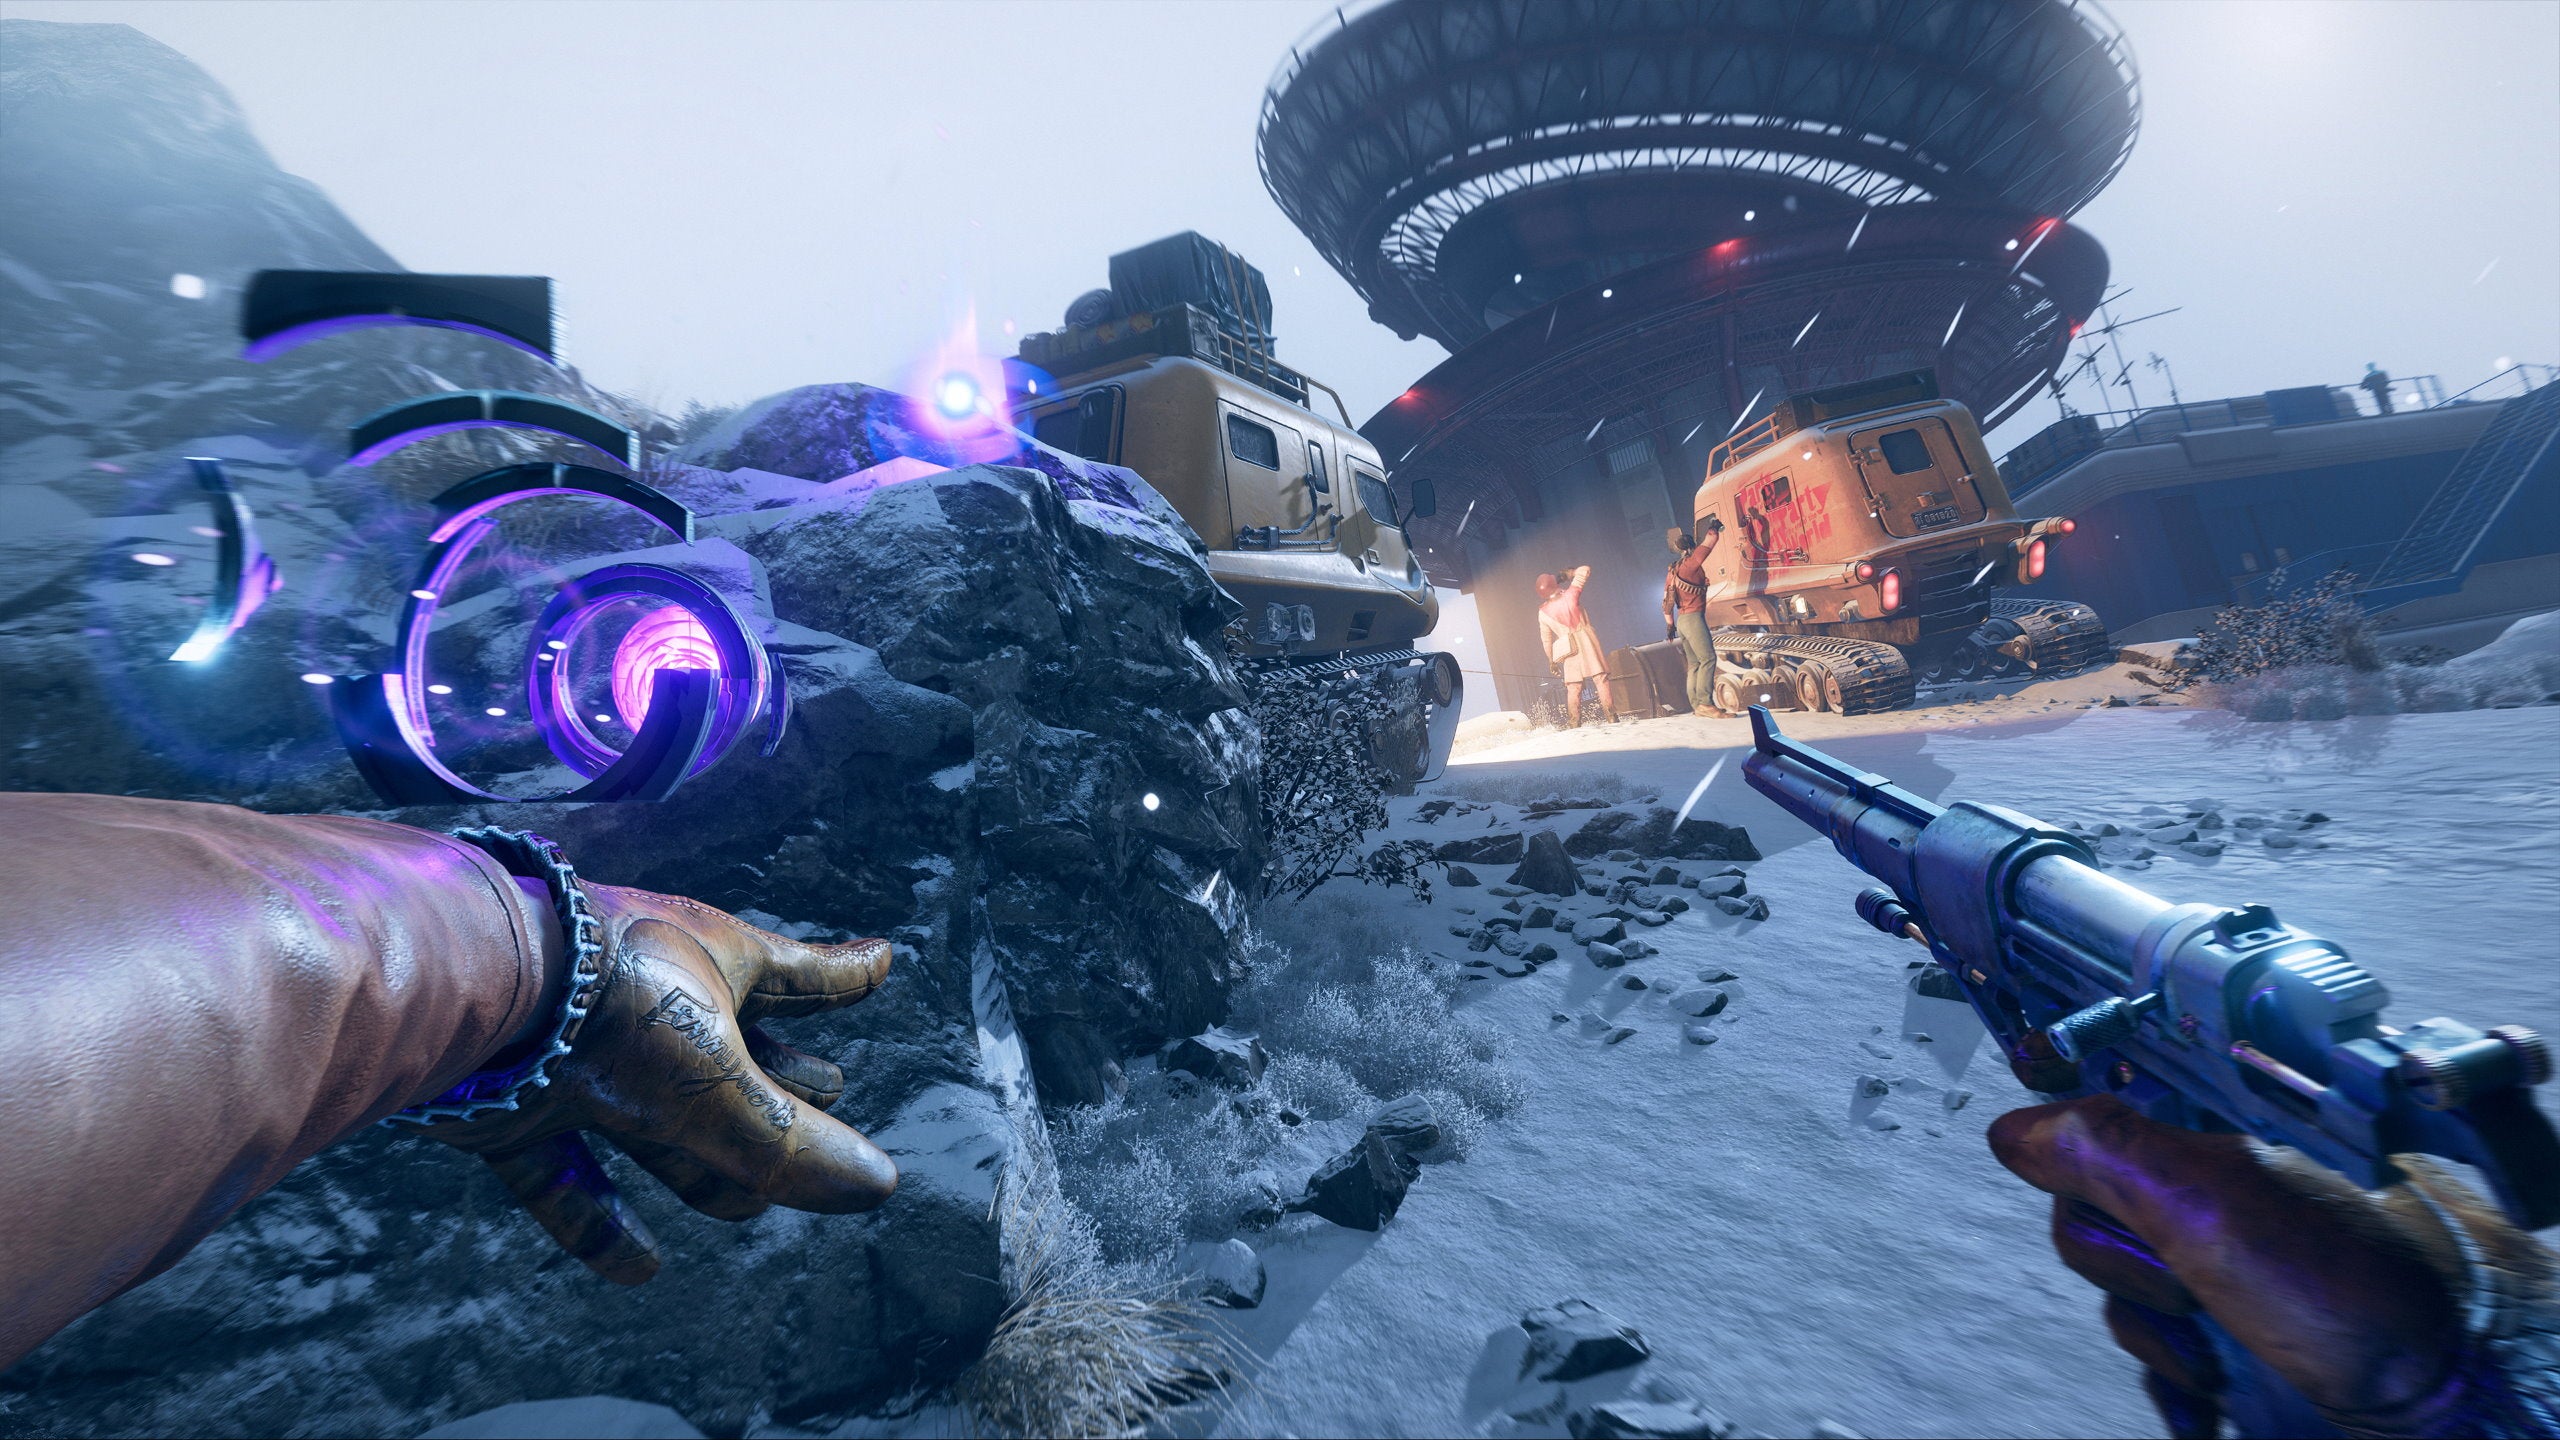 The player prepares to use their shift power on an icy hill in Deathloop